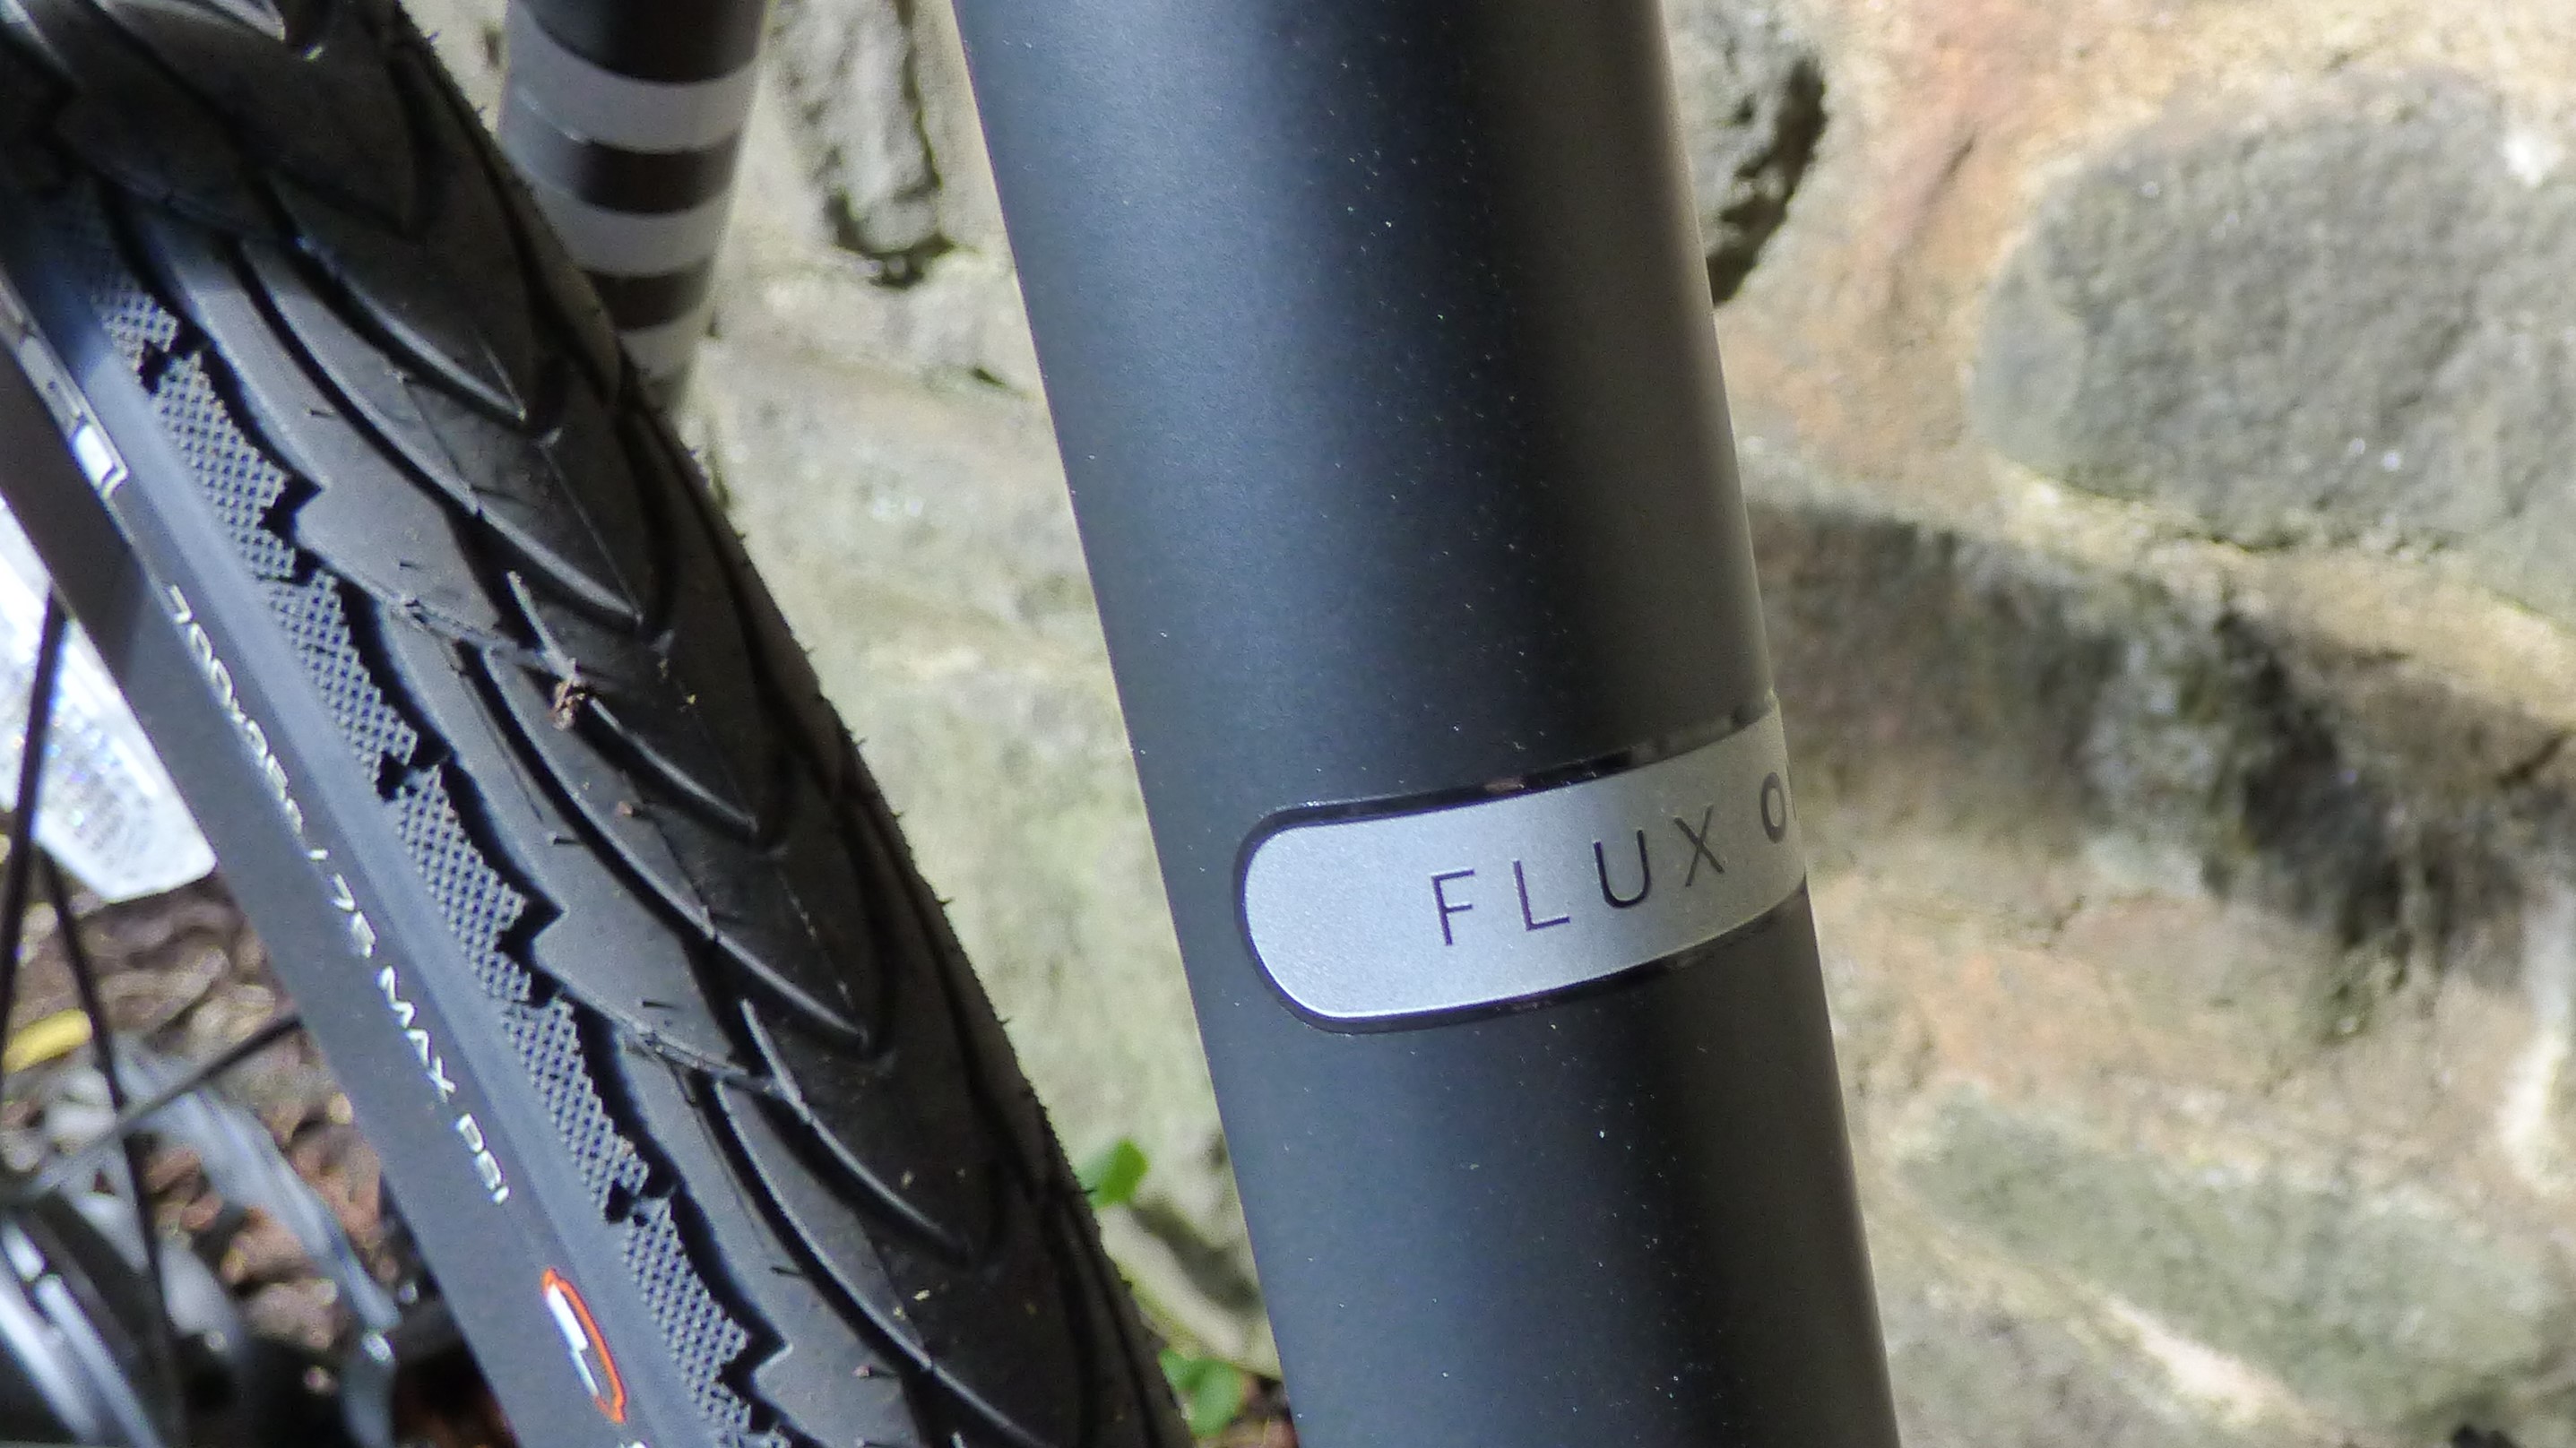 Pure Flux One downtube with reflective decals